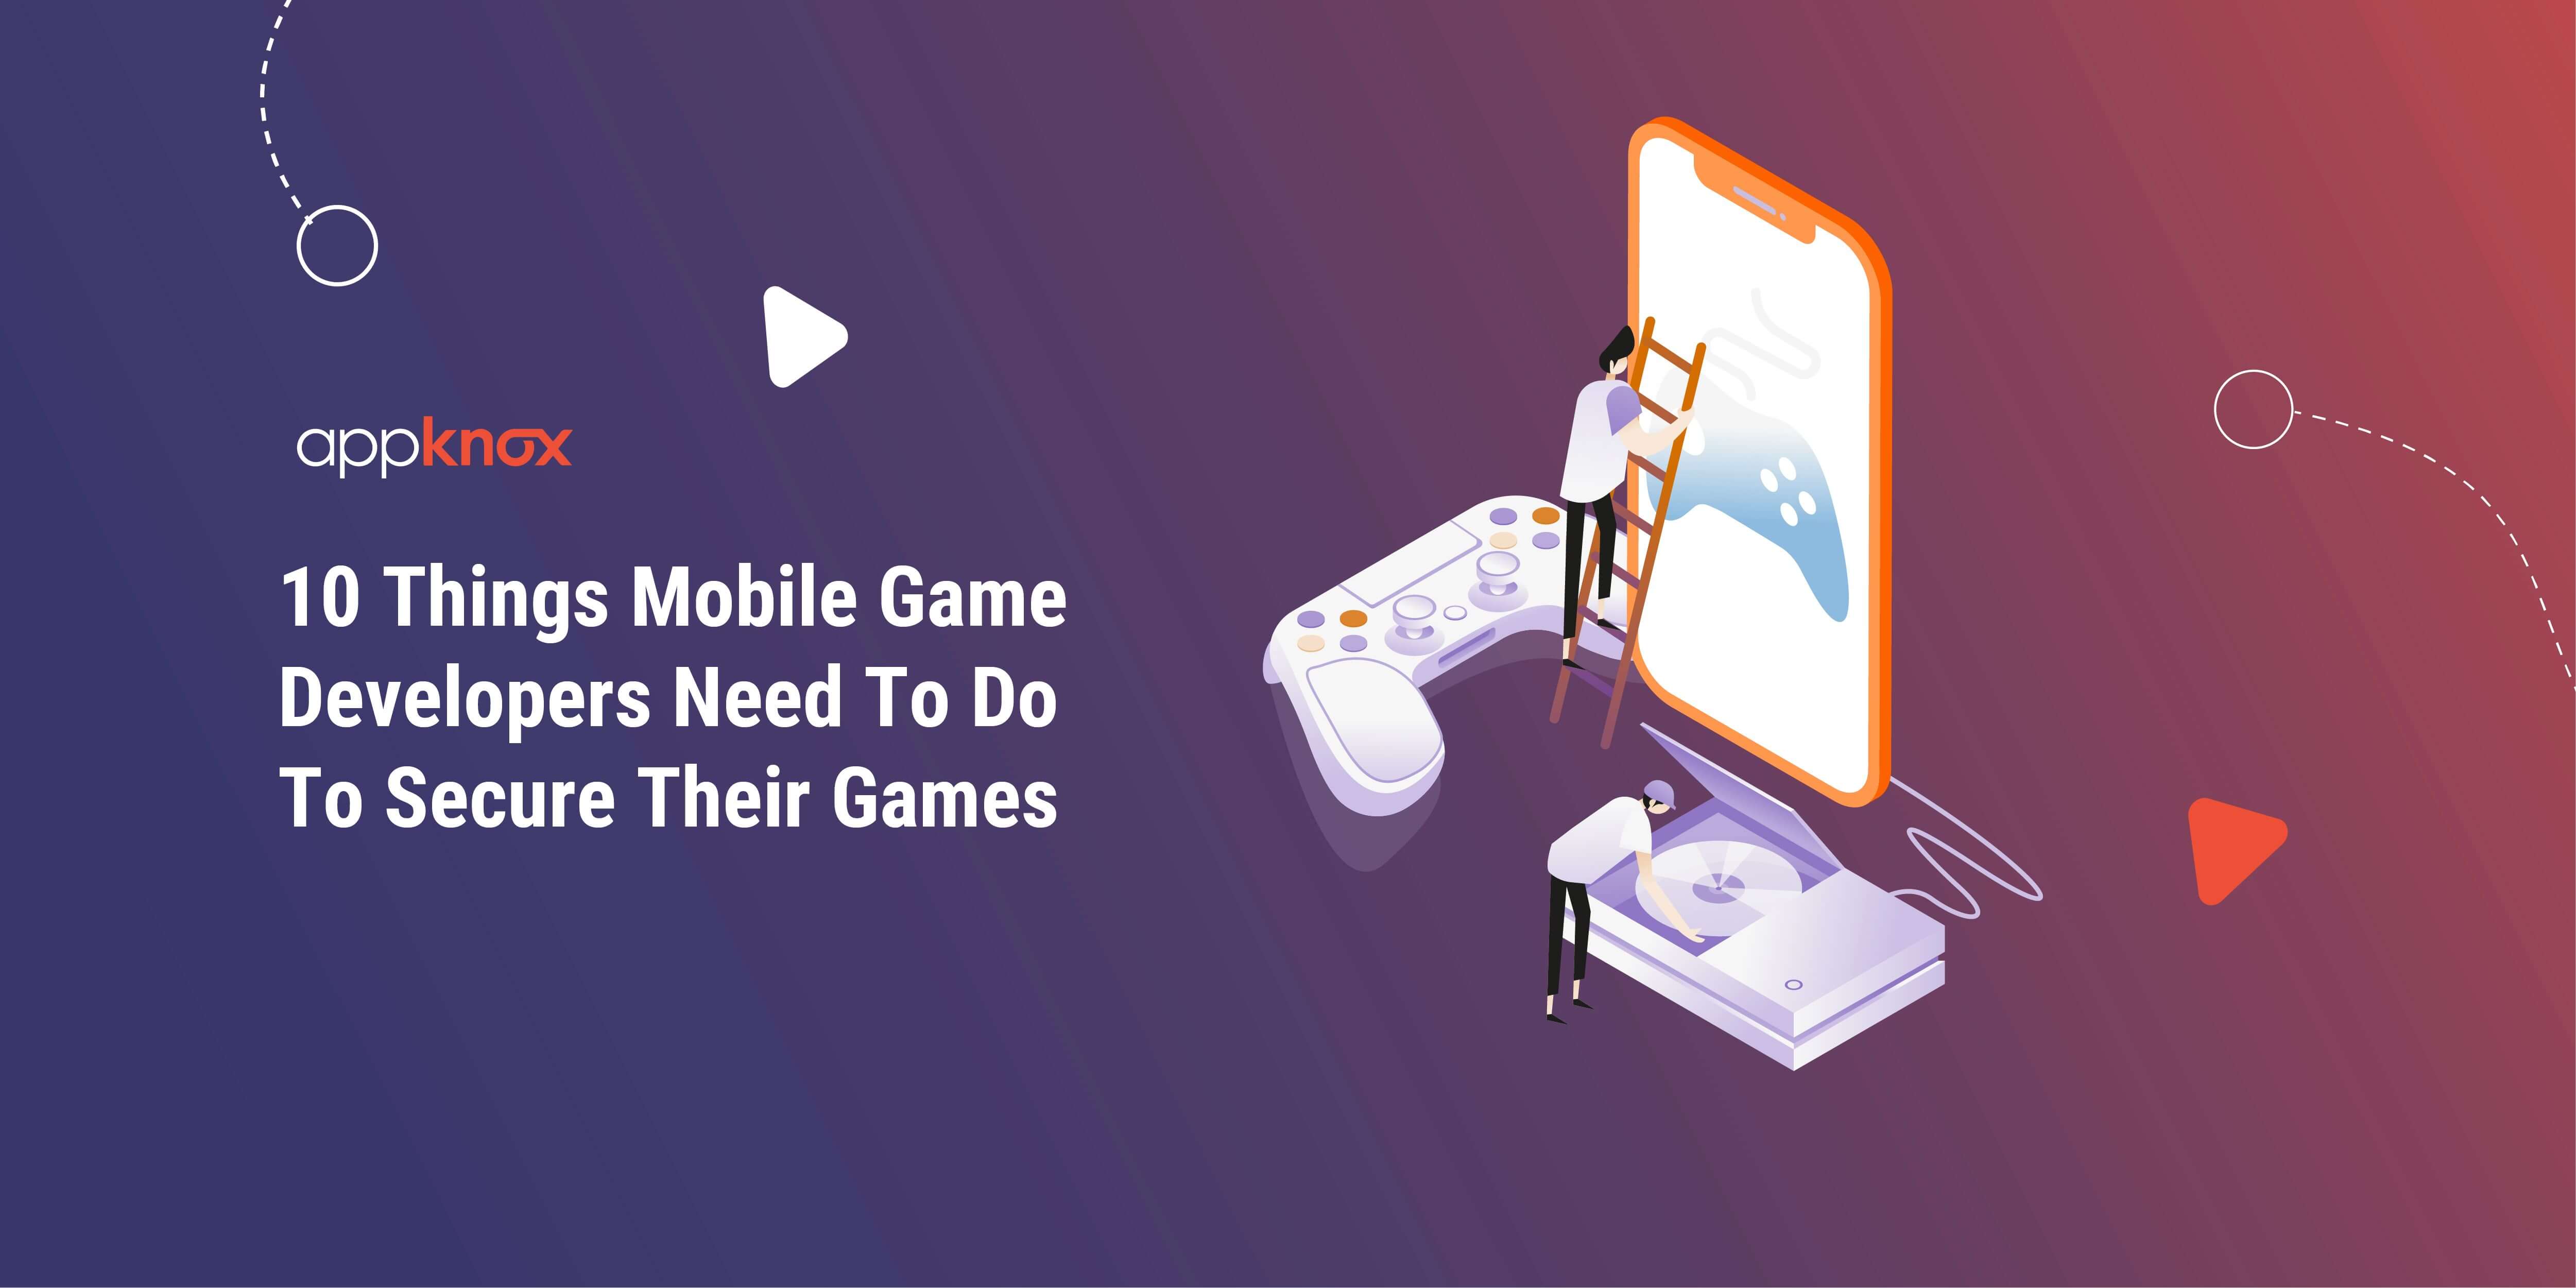 10 Things Mobile Game Developers Need To Do To Secure Their Games